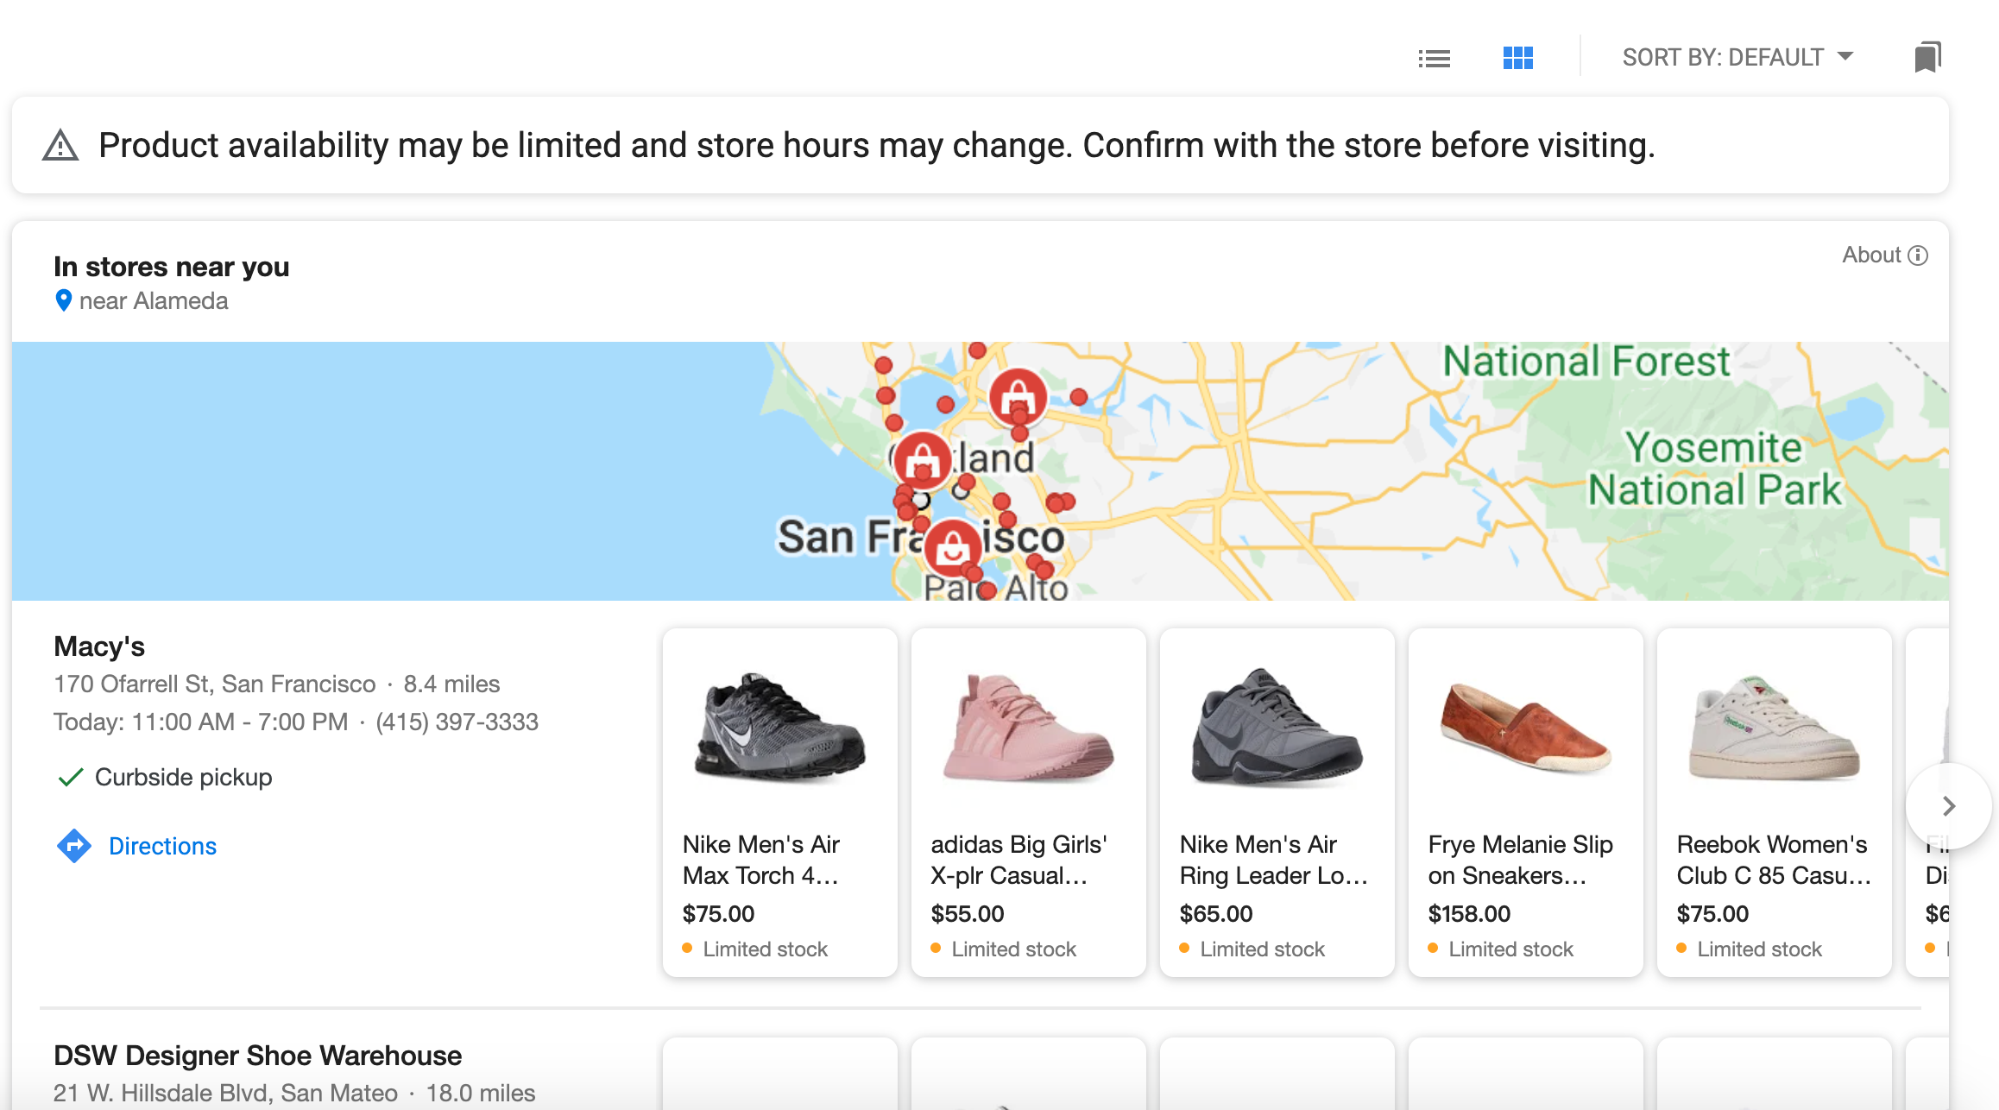 Great search UX with location data